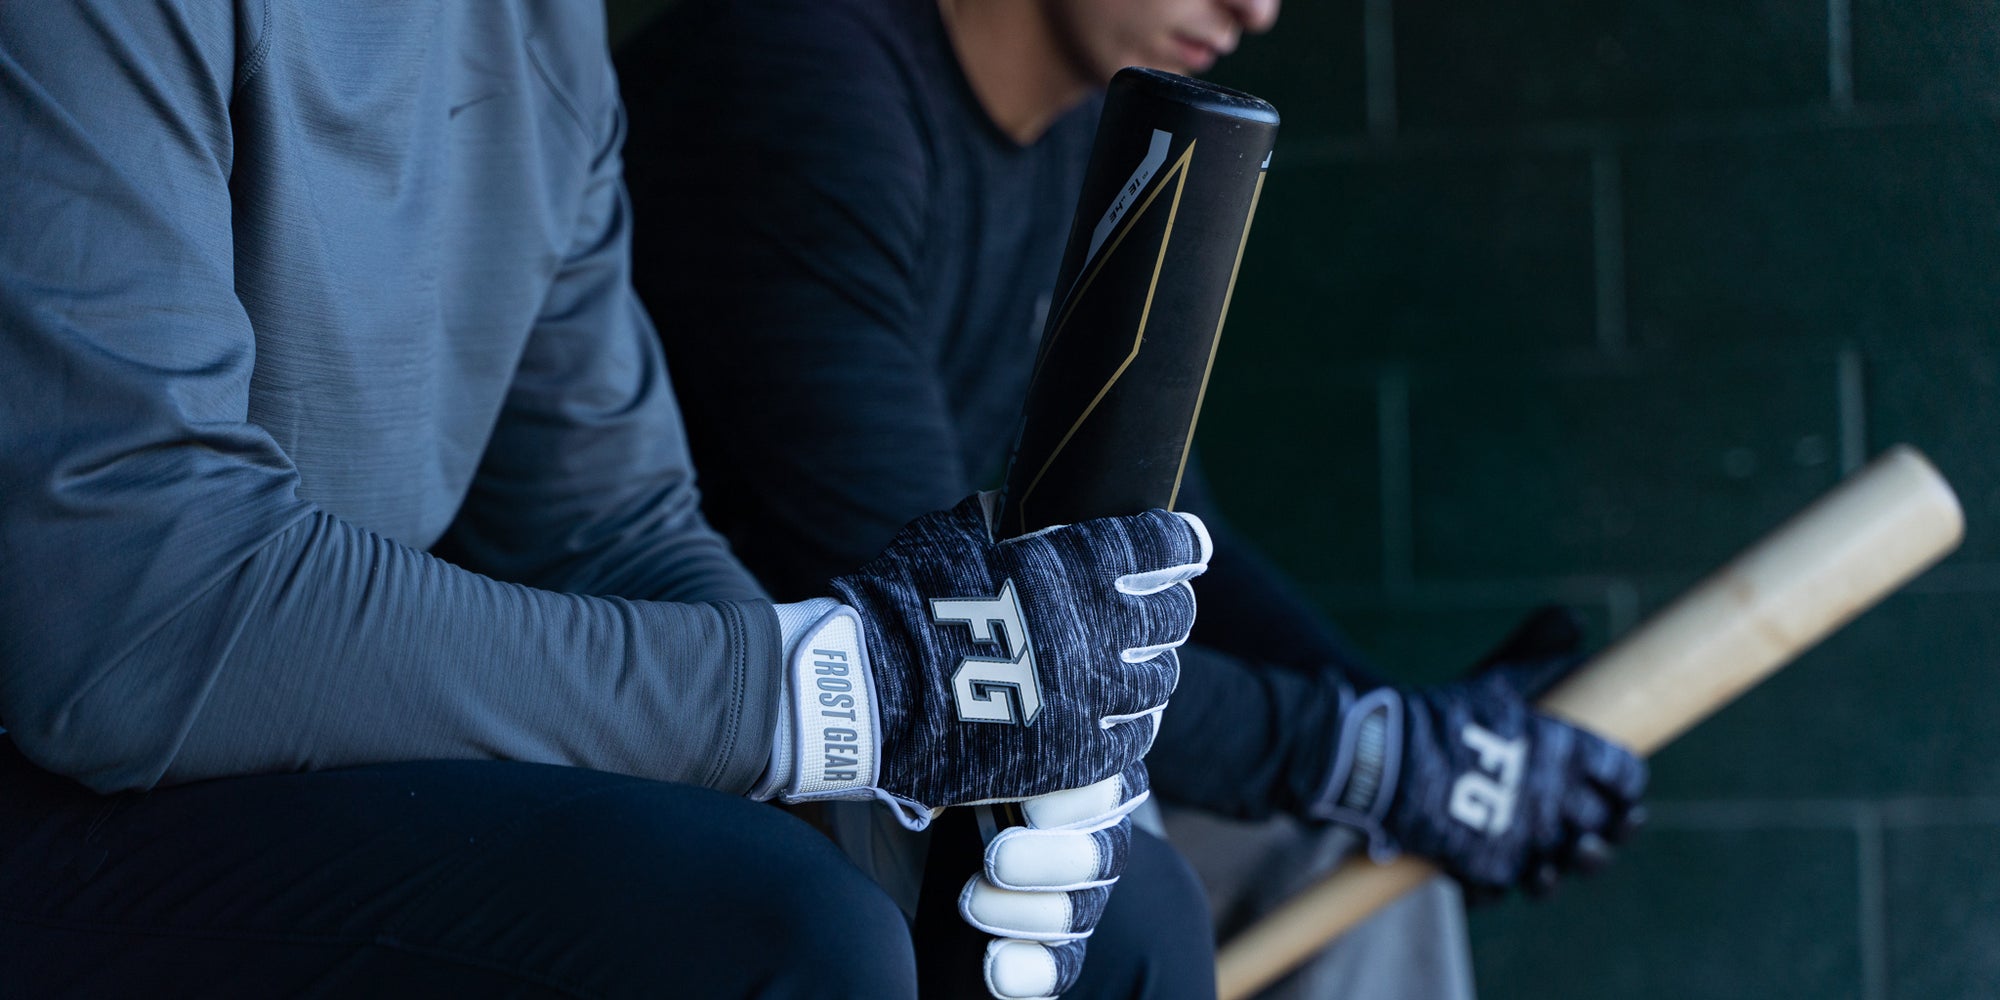 Frost Gear Throwing and Batting Gloves